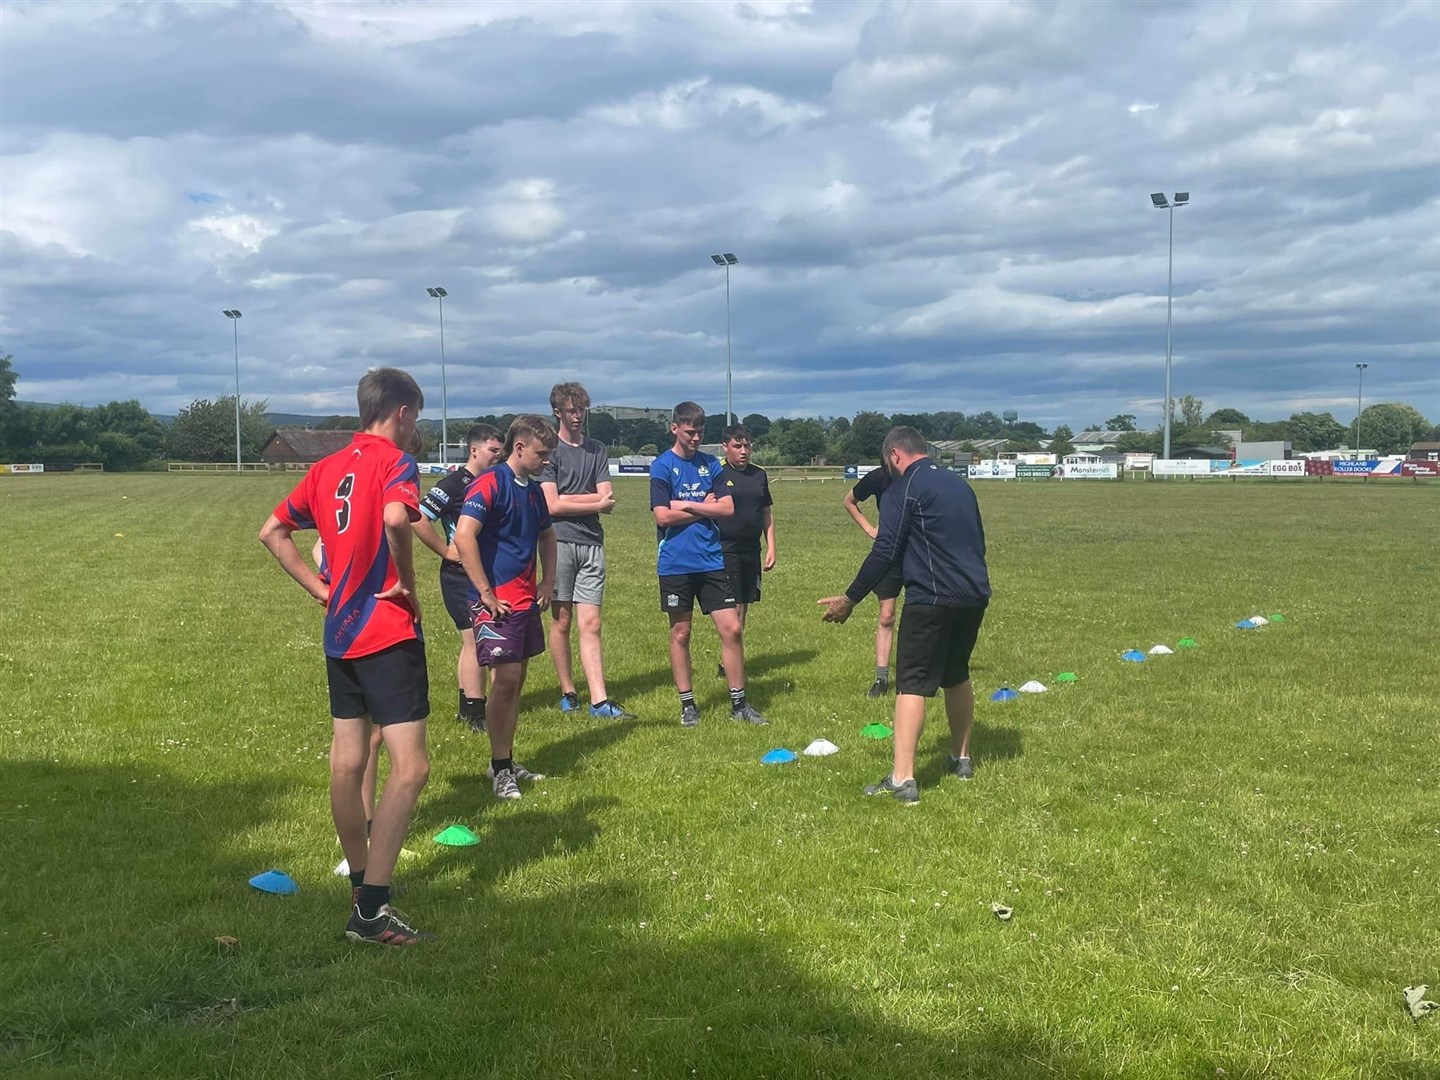 Ross Sutherland Rugby Club held a taster session ahead of launching their Rugby Academy before schools broke for summer.